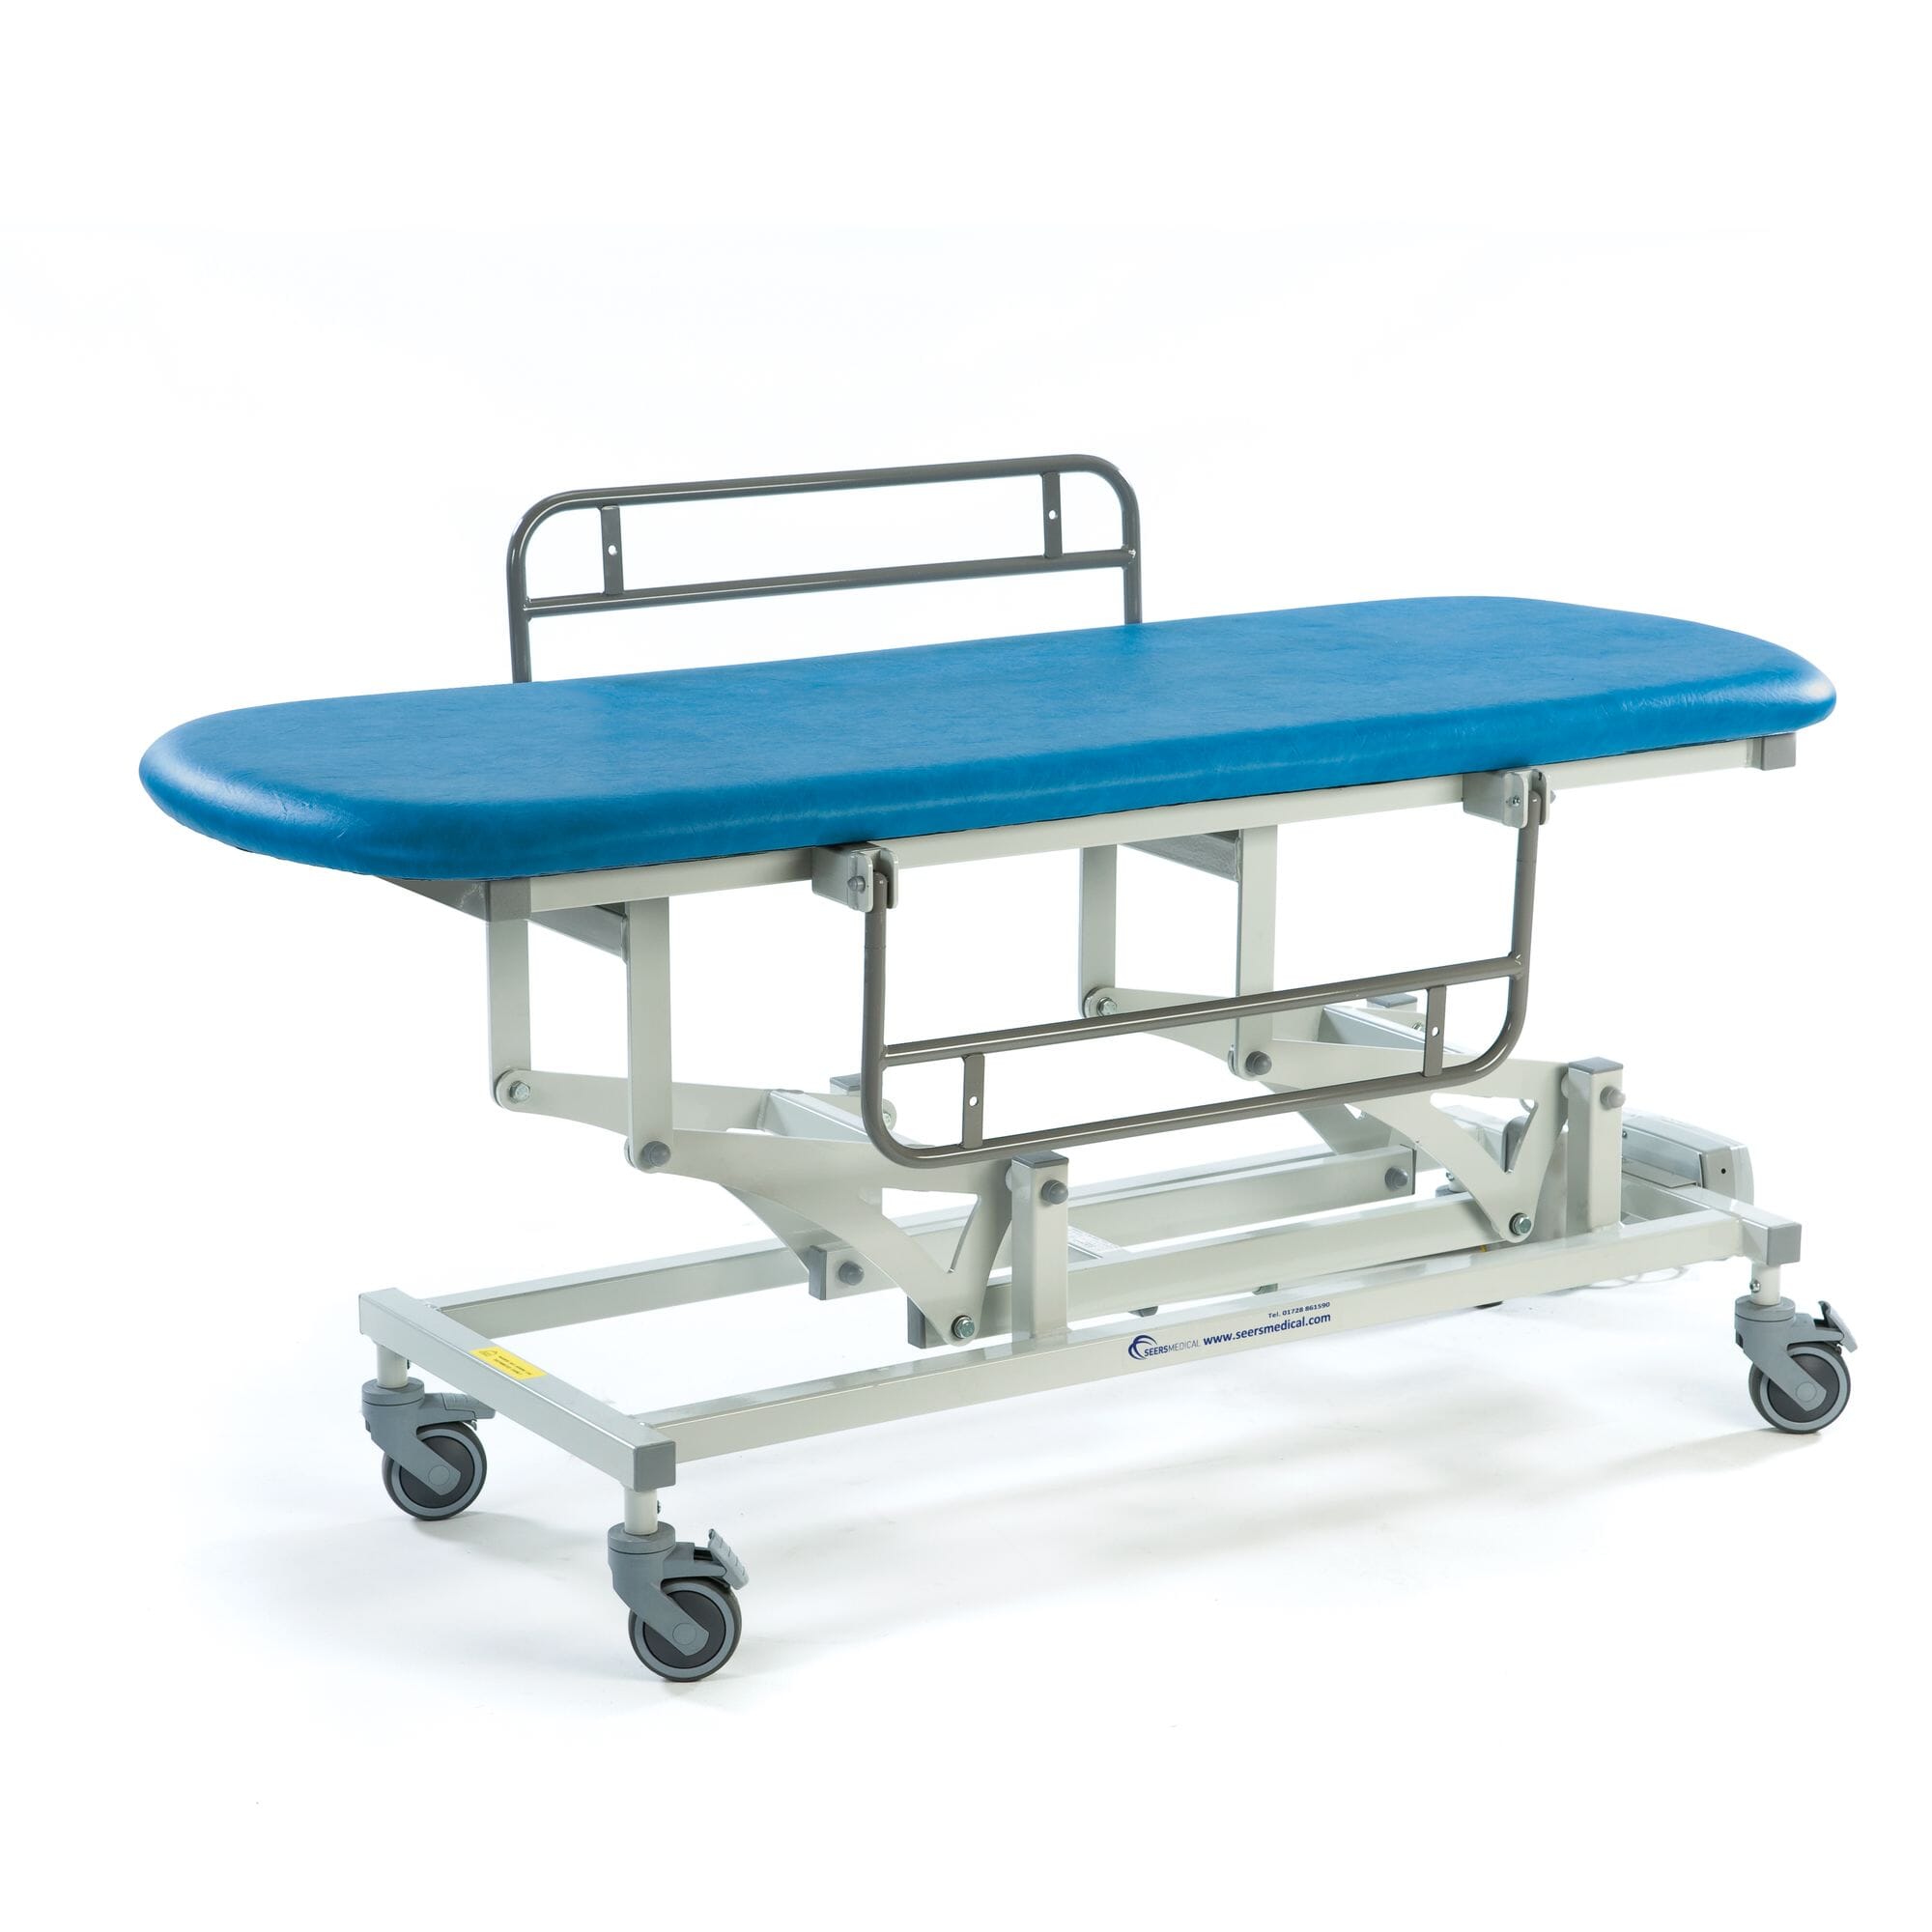 View Electric Sterling Changing Table Canard 1520mm information